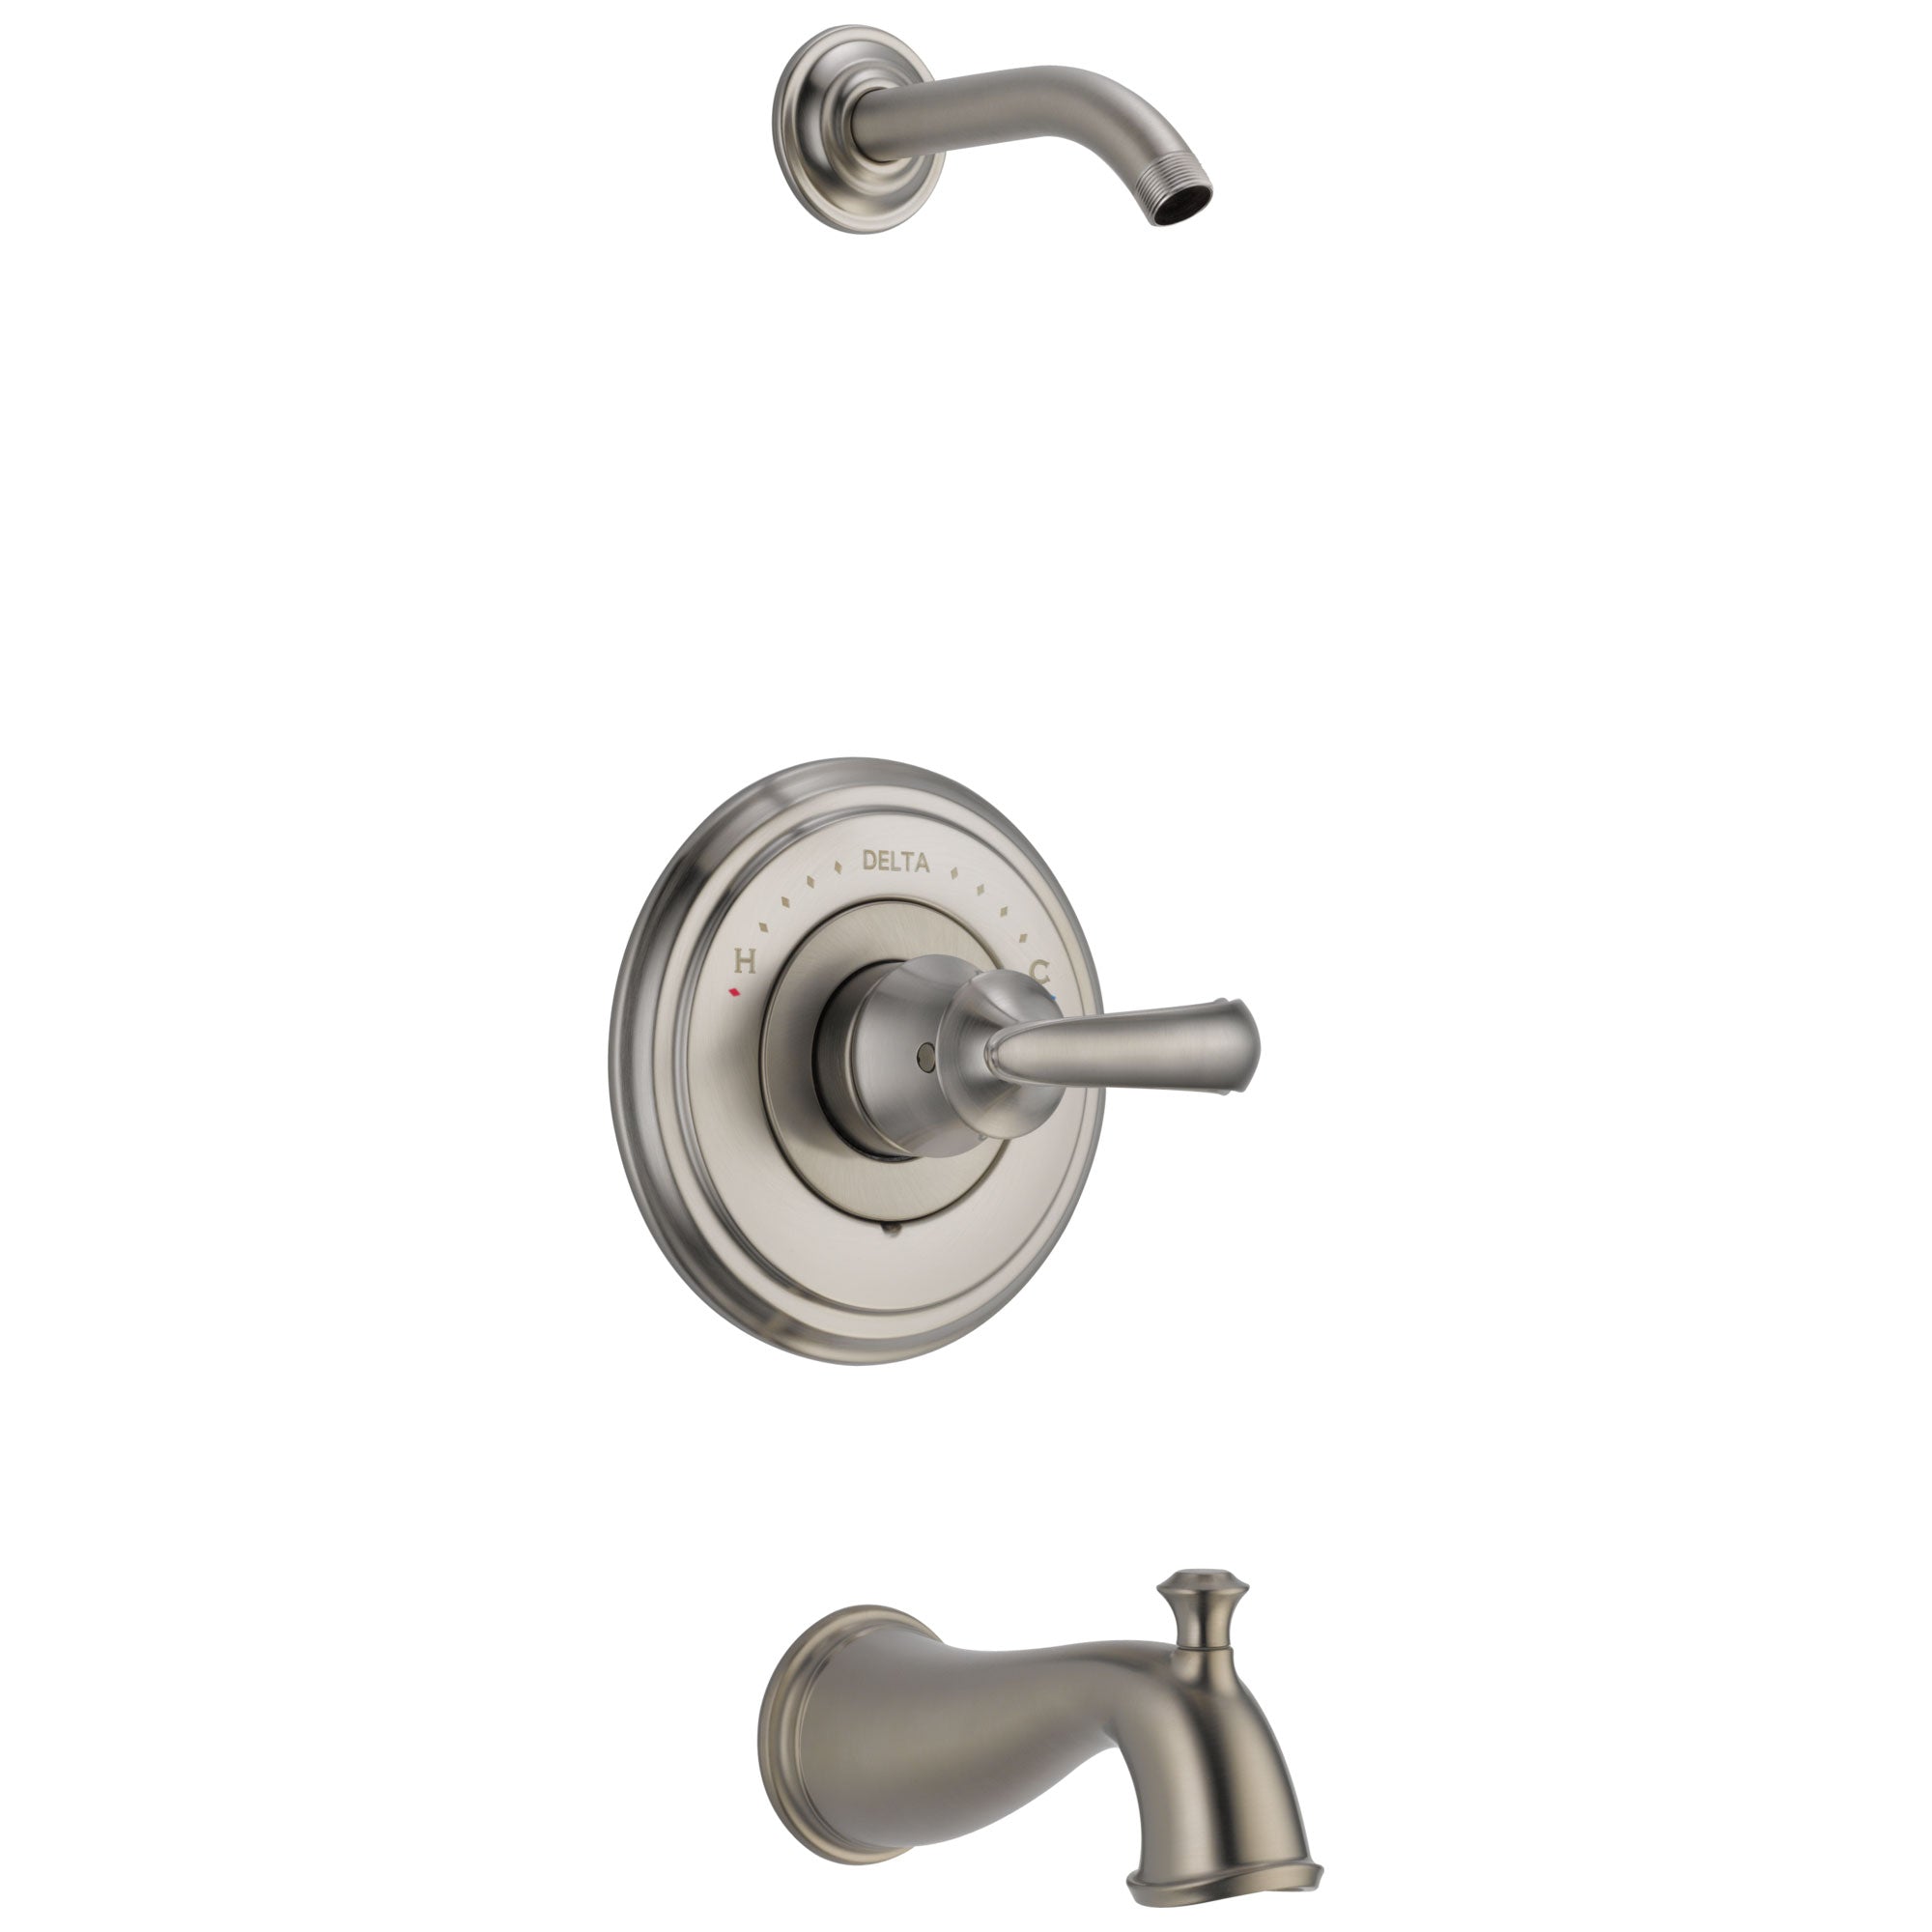 Delta Cassidy Stainless Steel Finish Tub and Shower Combination - Less Showerhead INCLUDES Single French Curve Lever Handle and Rough-in Valve with Stops D1819V